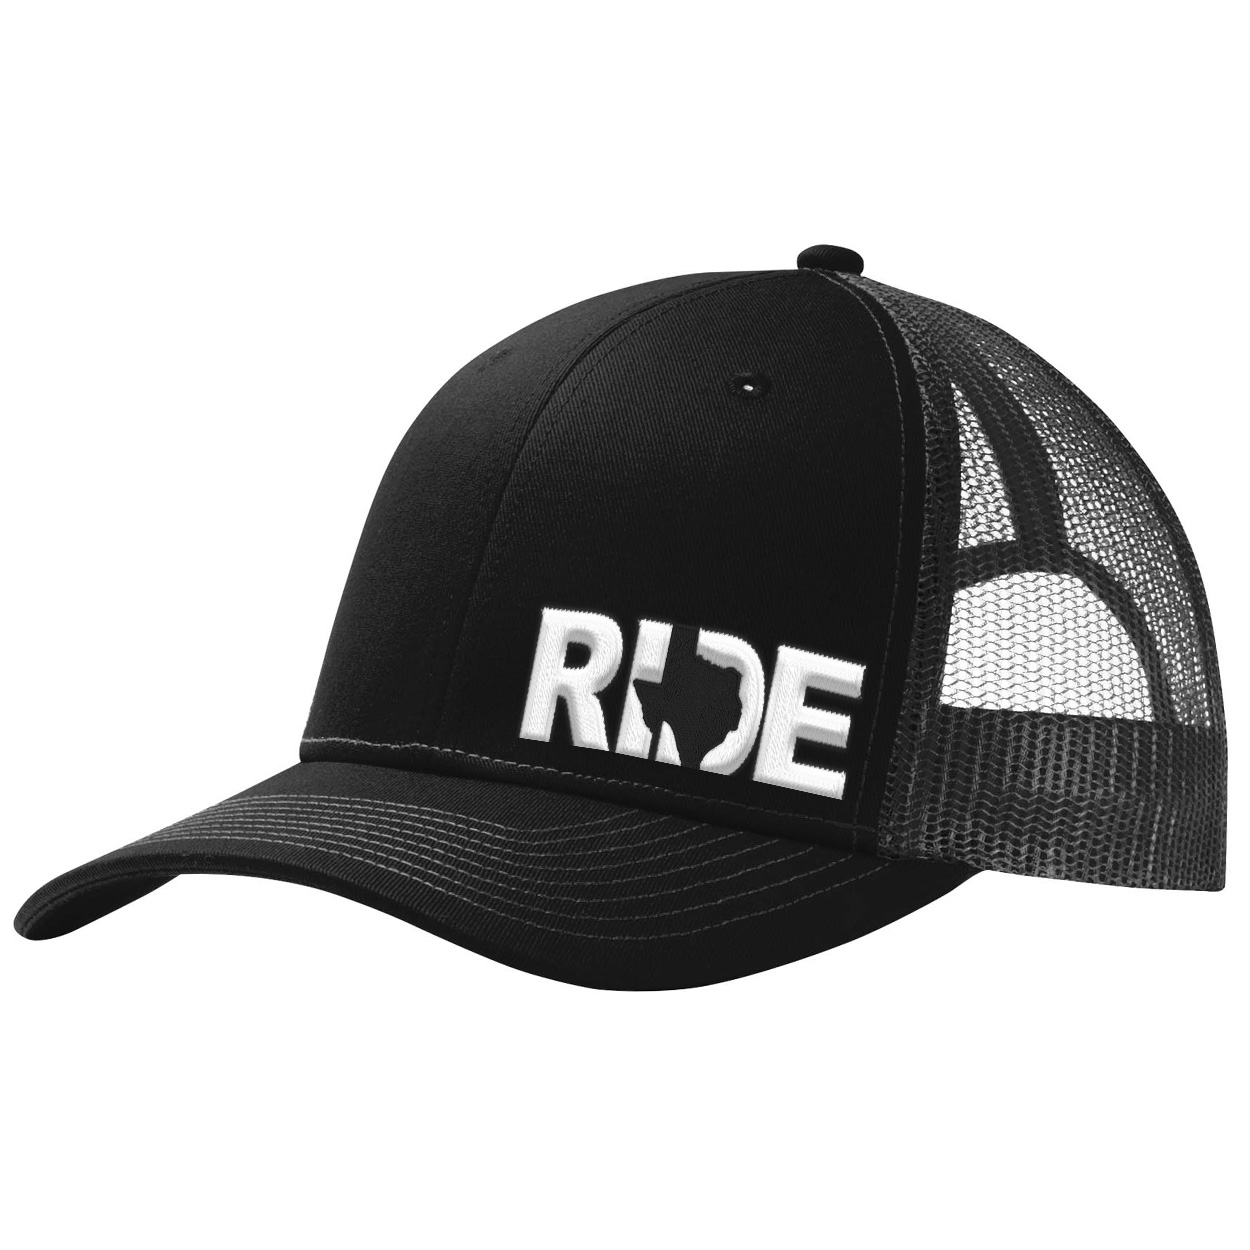 Ride Texas Night Out Pro Embroidered Snapback Trucker Hat Black/Gray